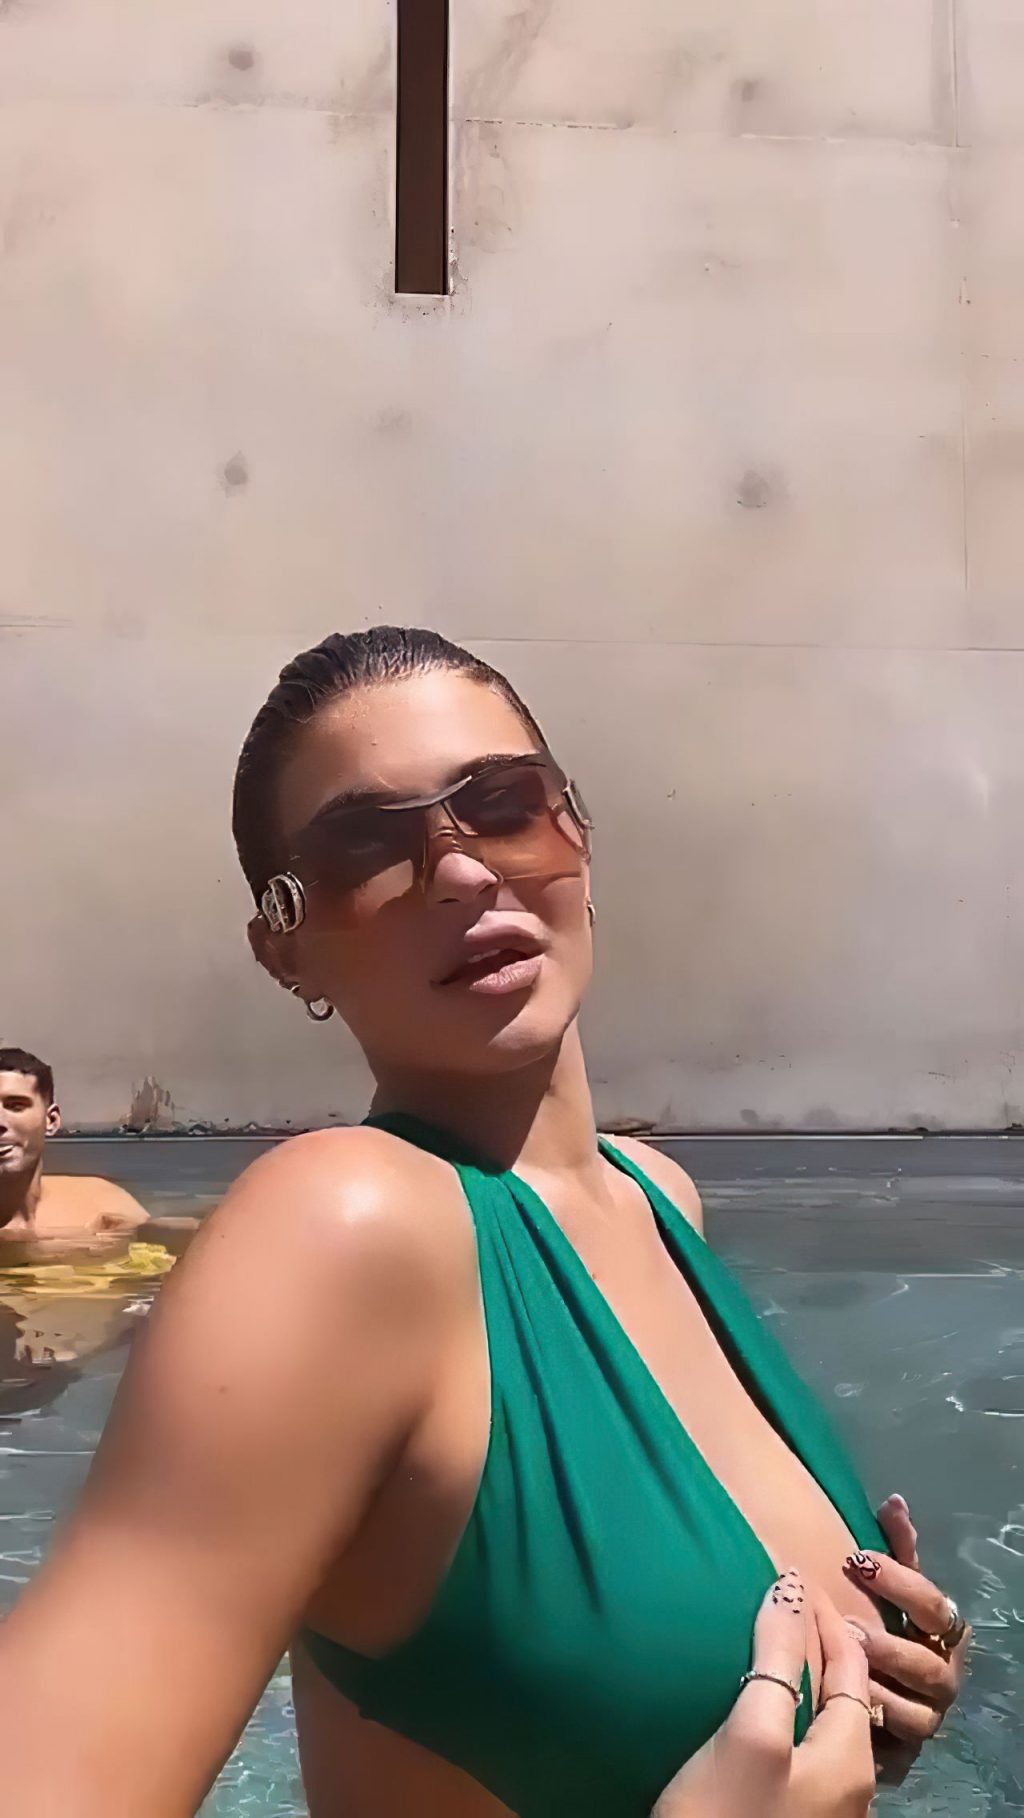 Kylie Jenner Shows Off Her Big Boobs in a Pool (21 Pics+ GIFs &amp; Video)